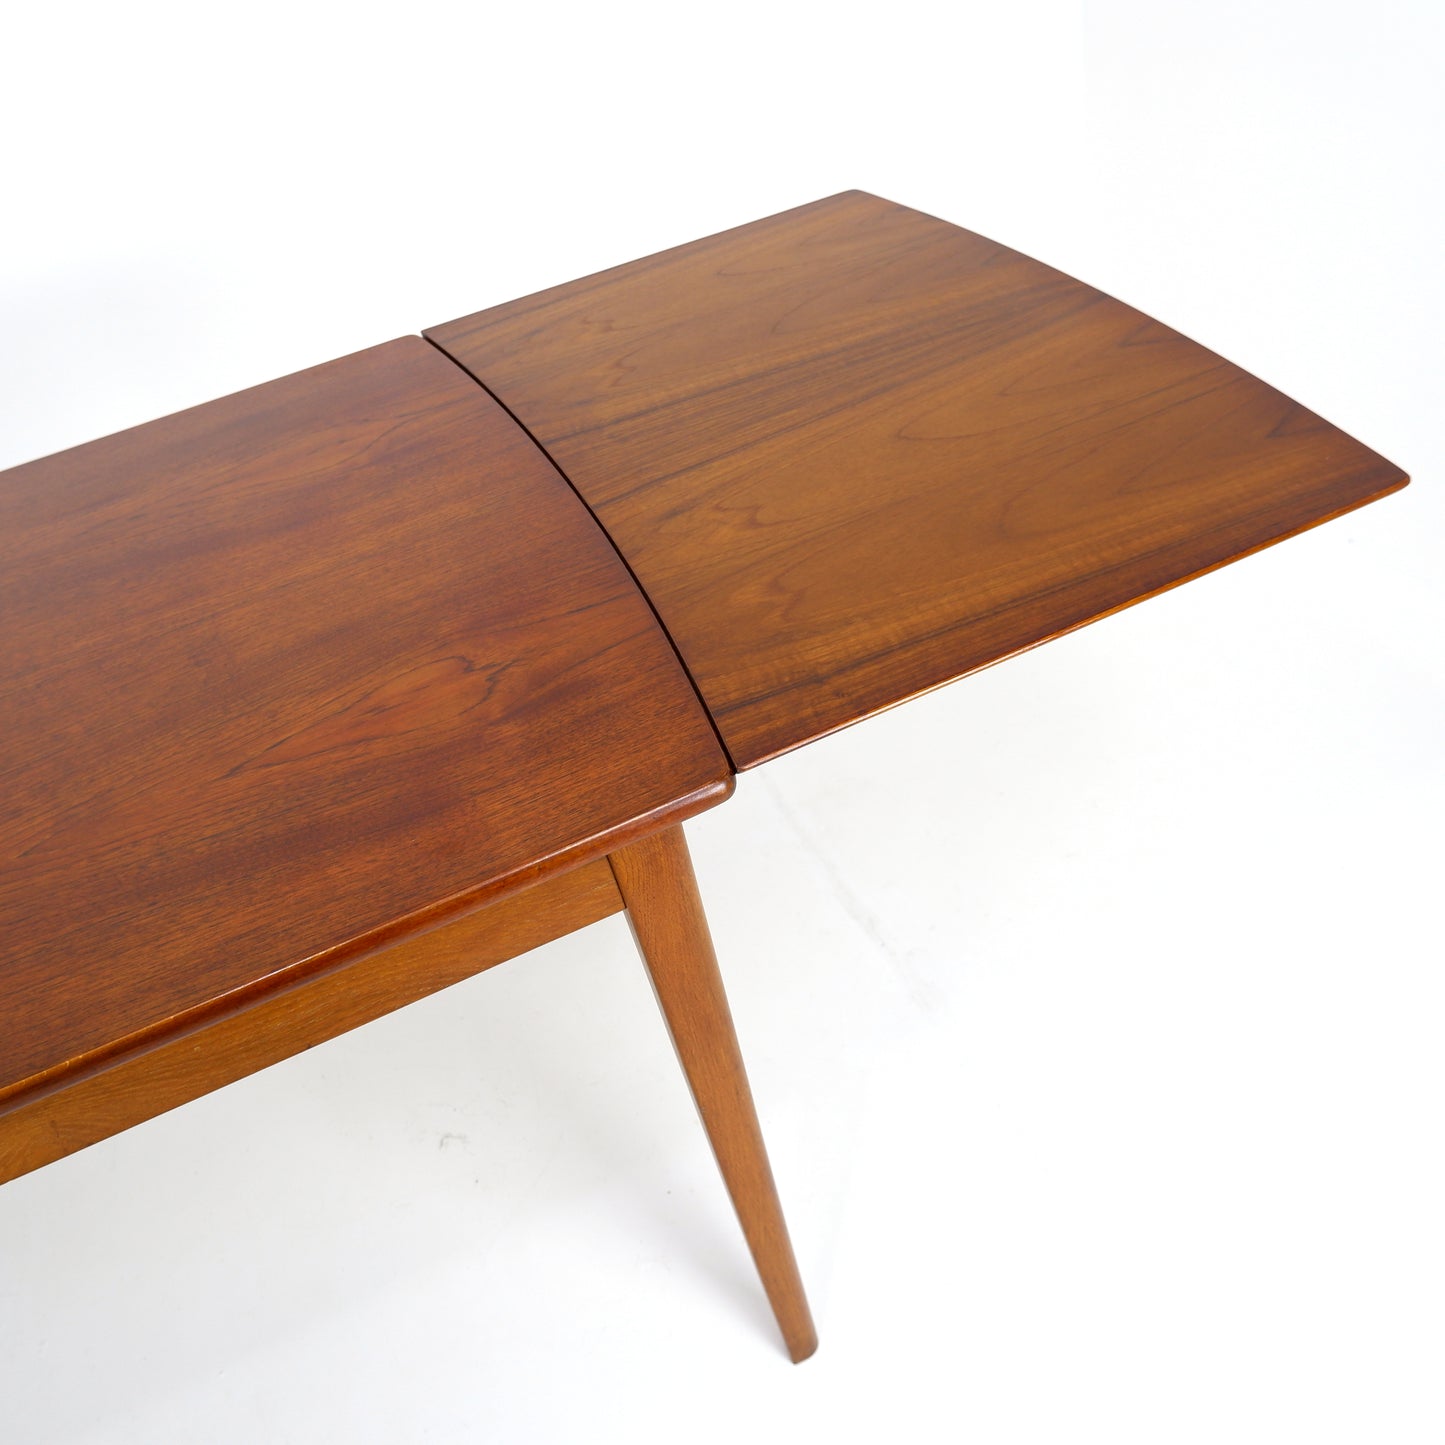 Danish Modern Dining Table and 4 Chairs by Slagelse Møbelvaerk in Teak  - Mid Century Modern